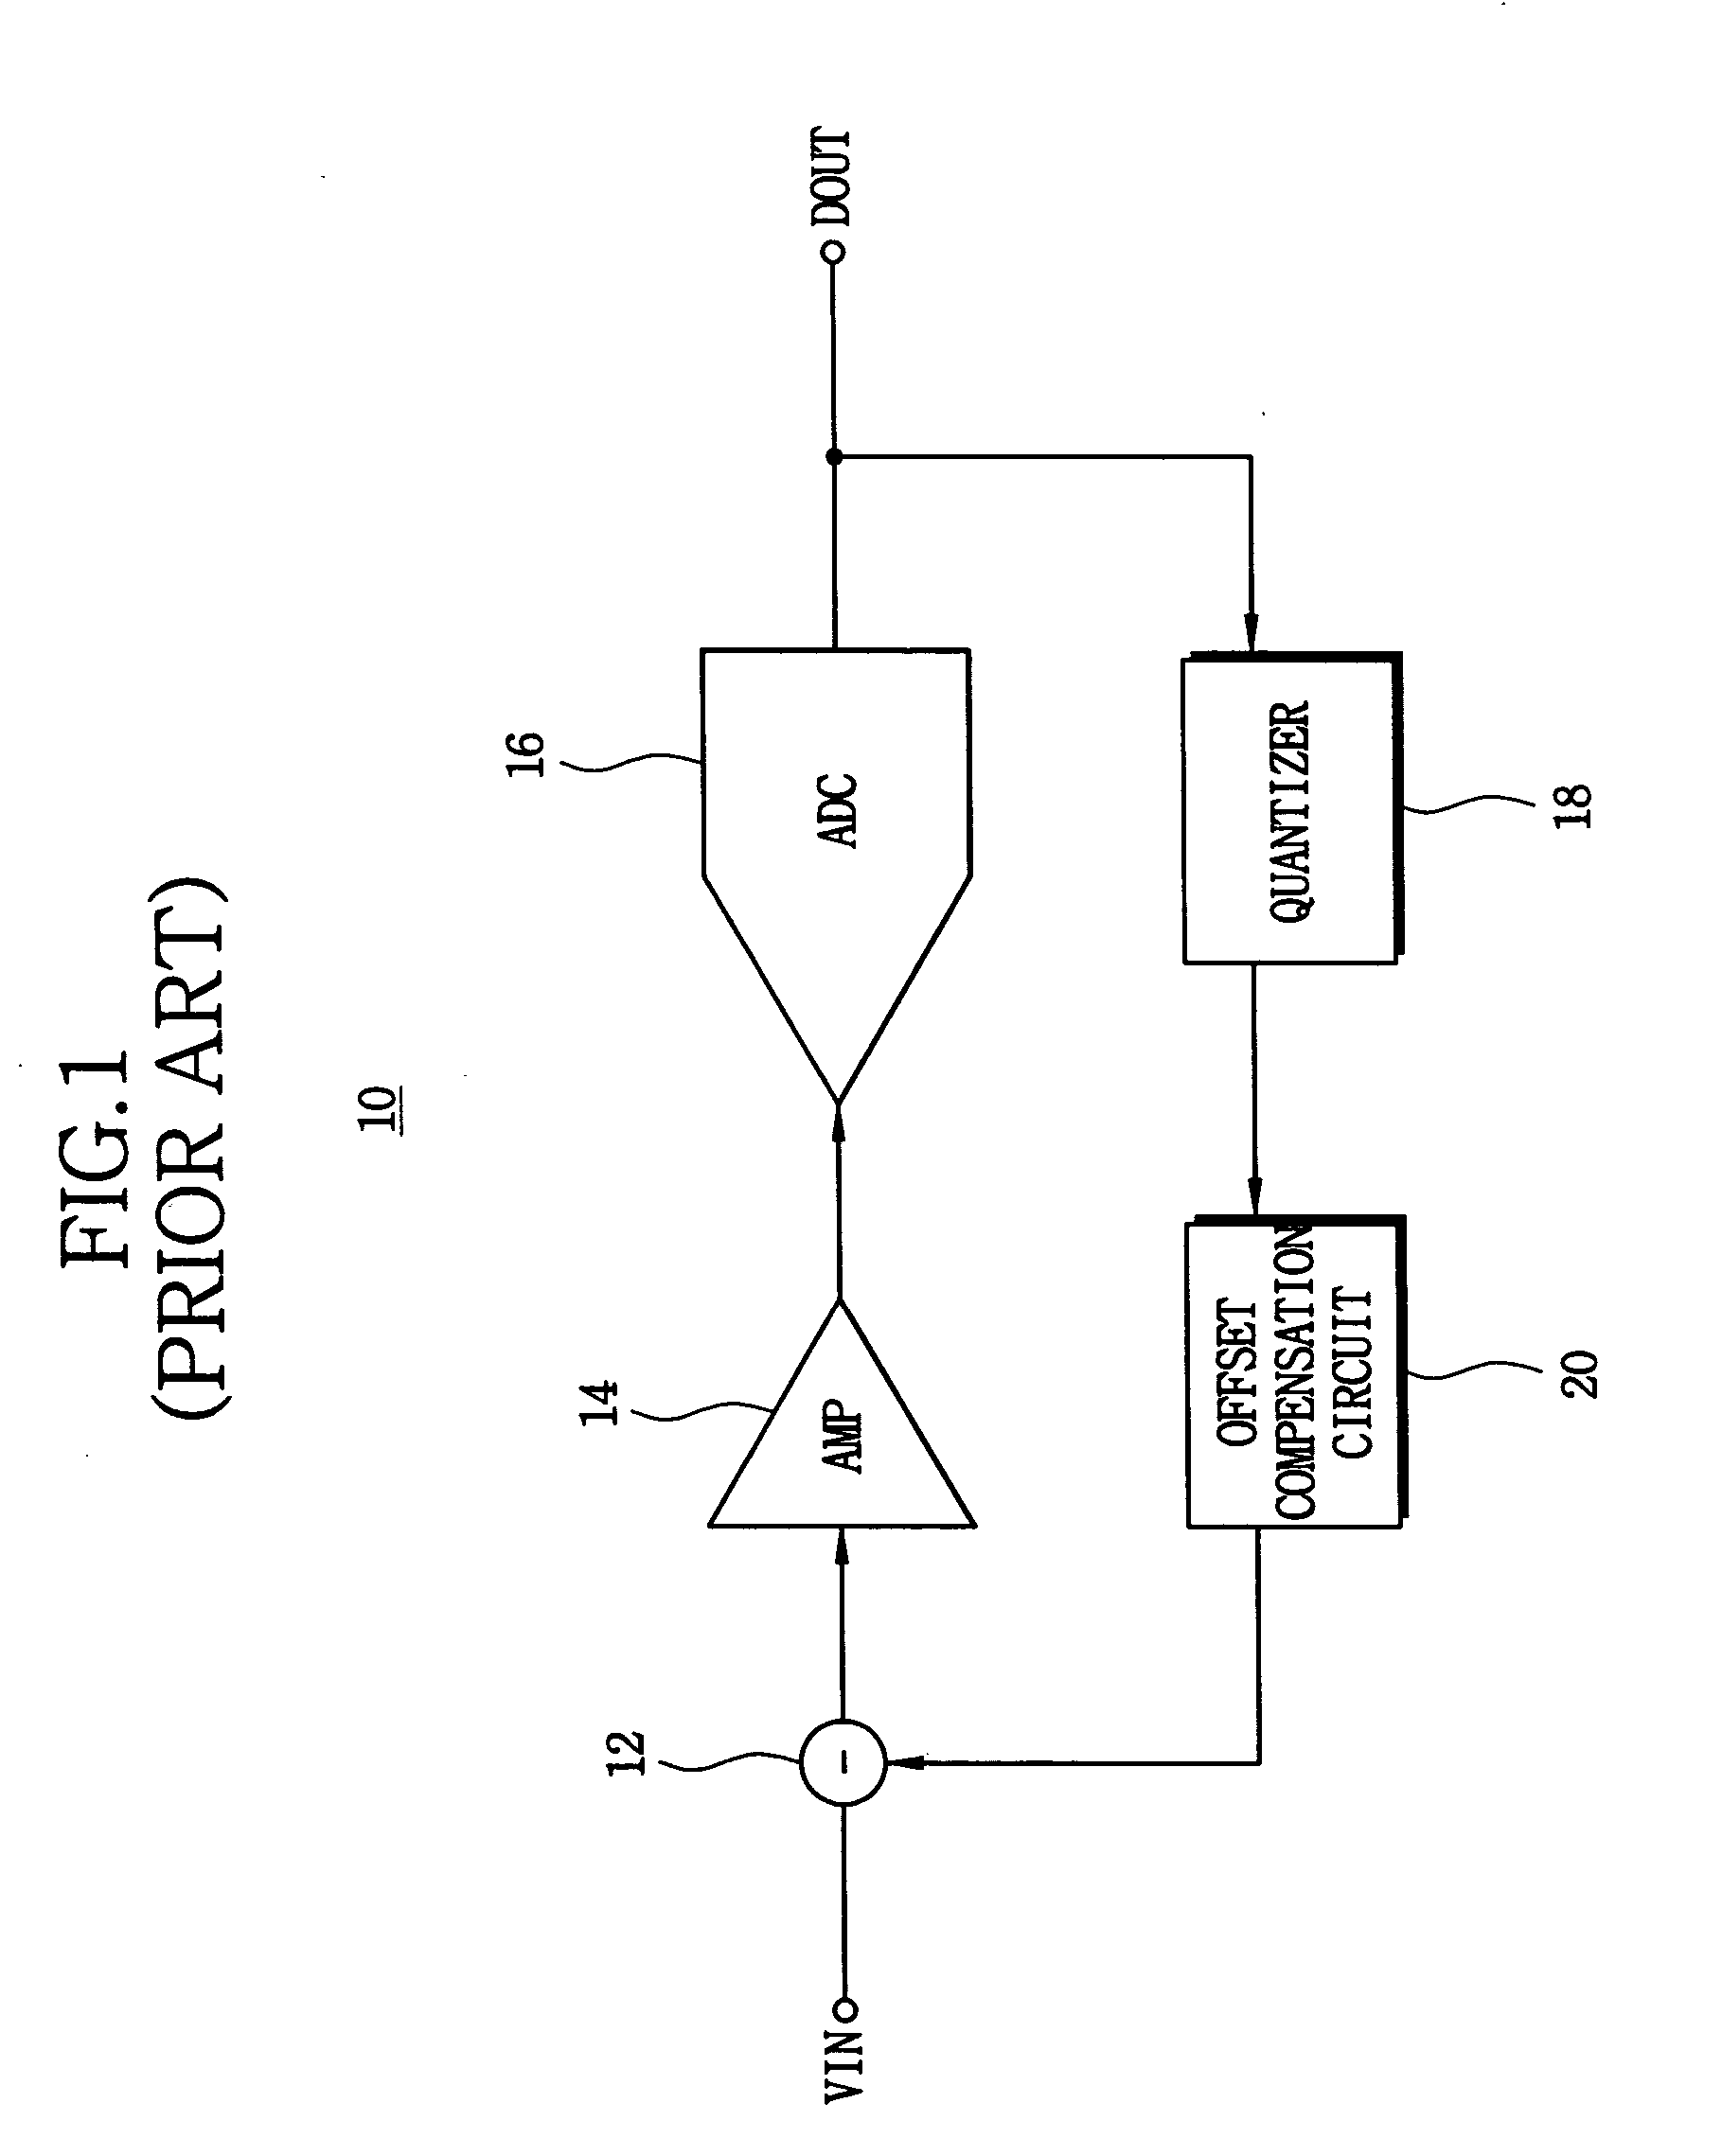 Analog front end circuit and method of compensating for DC offset in the analog front end circuit